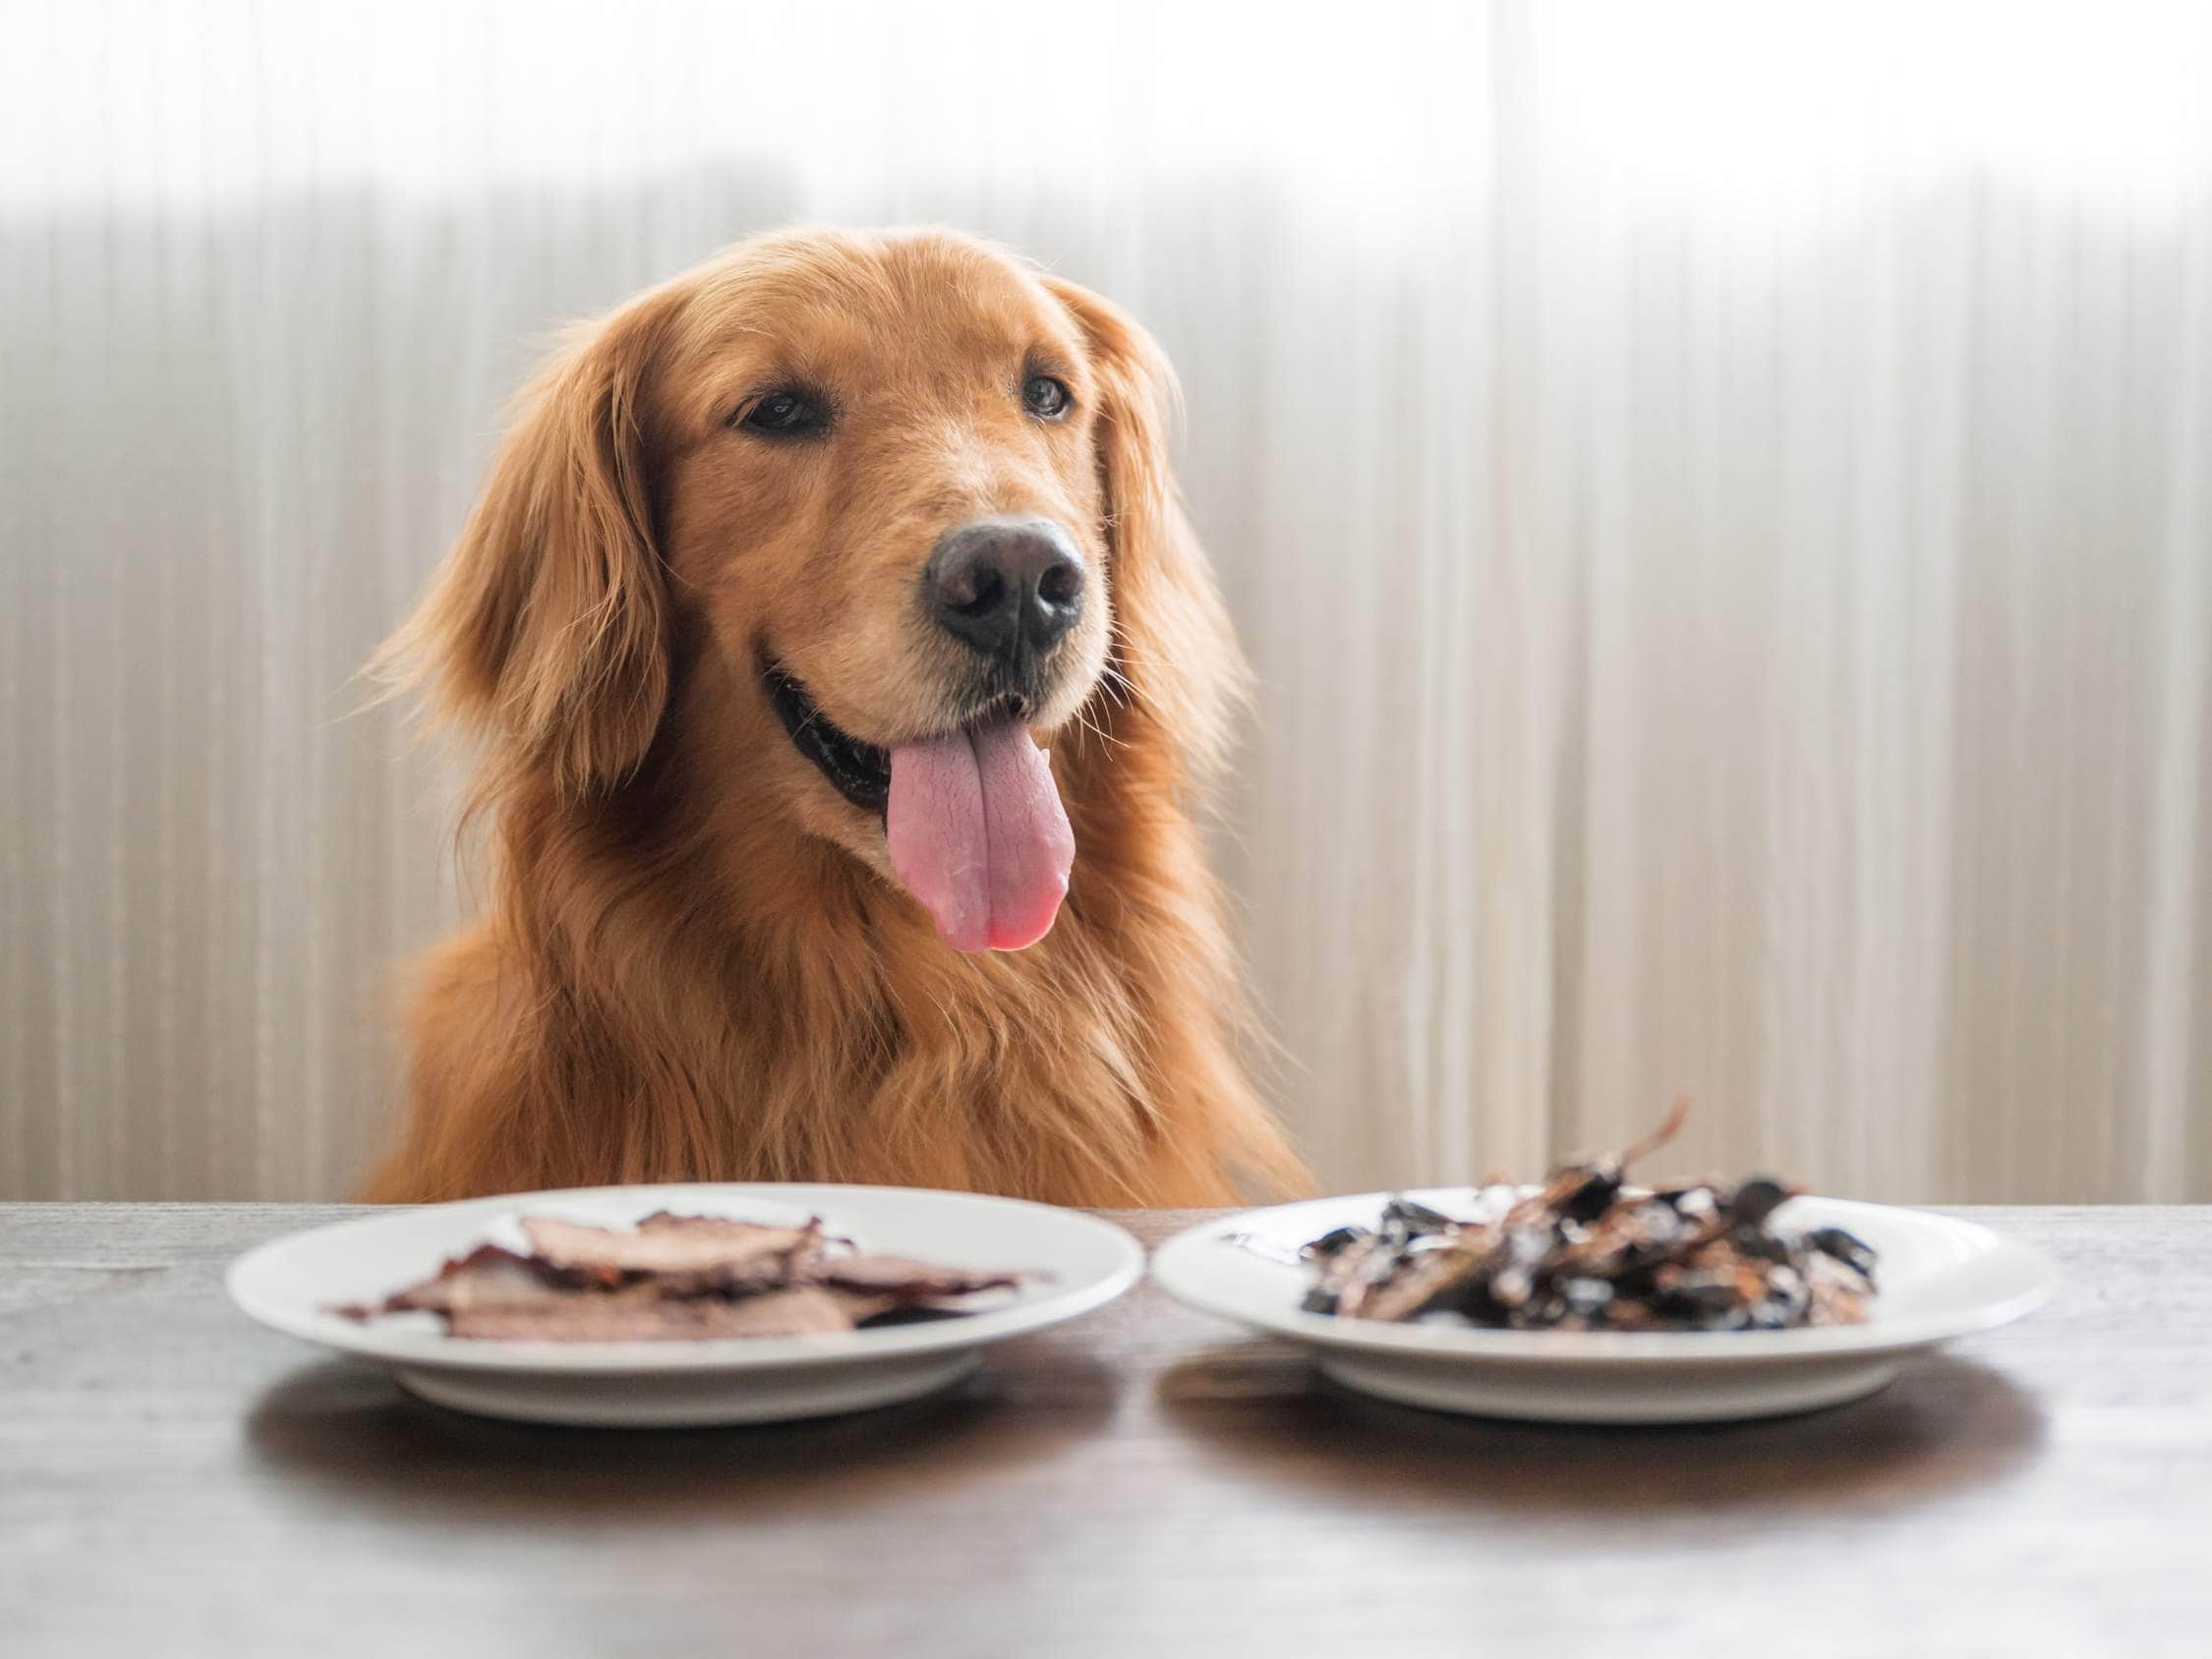 A golden retriever with its tongue out sits behind a table with two white plate.